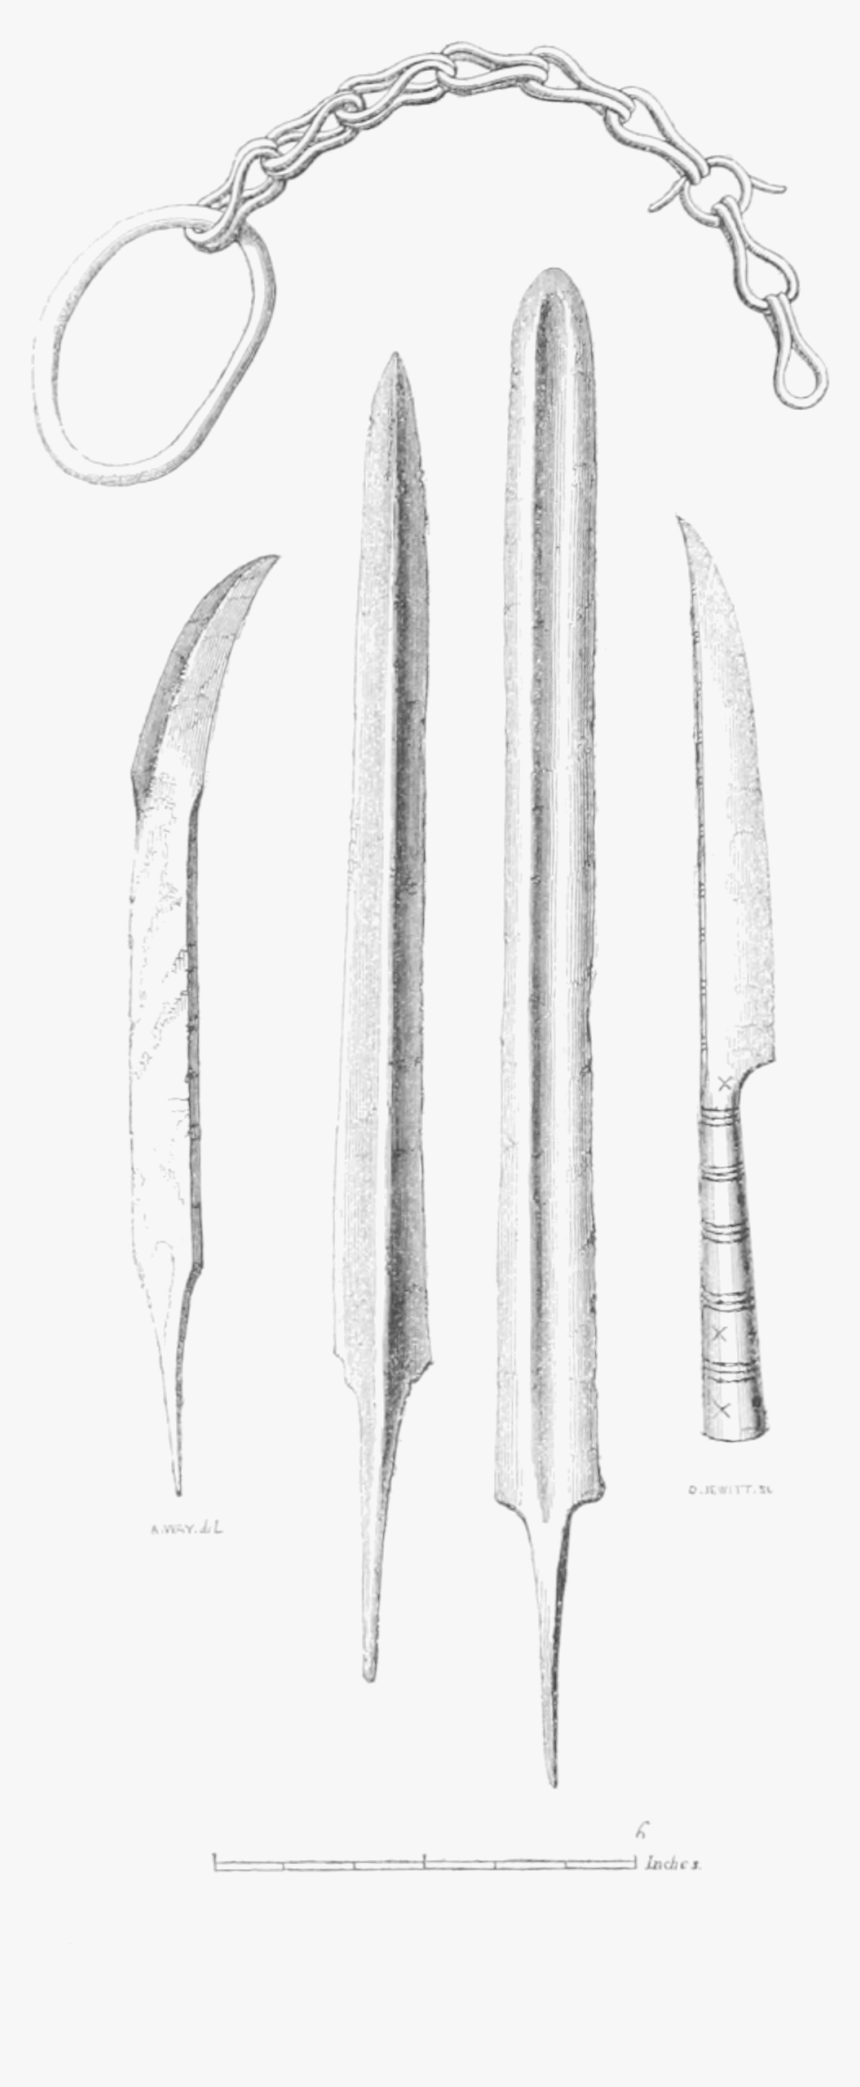 Archaeological Journal, Volume 6, 0197 - Bowie Knife, HD Png Download, Free Download